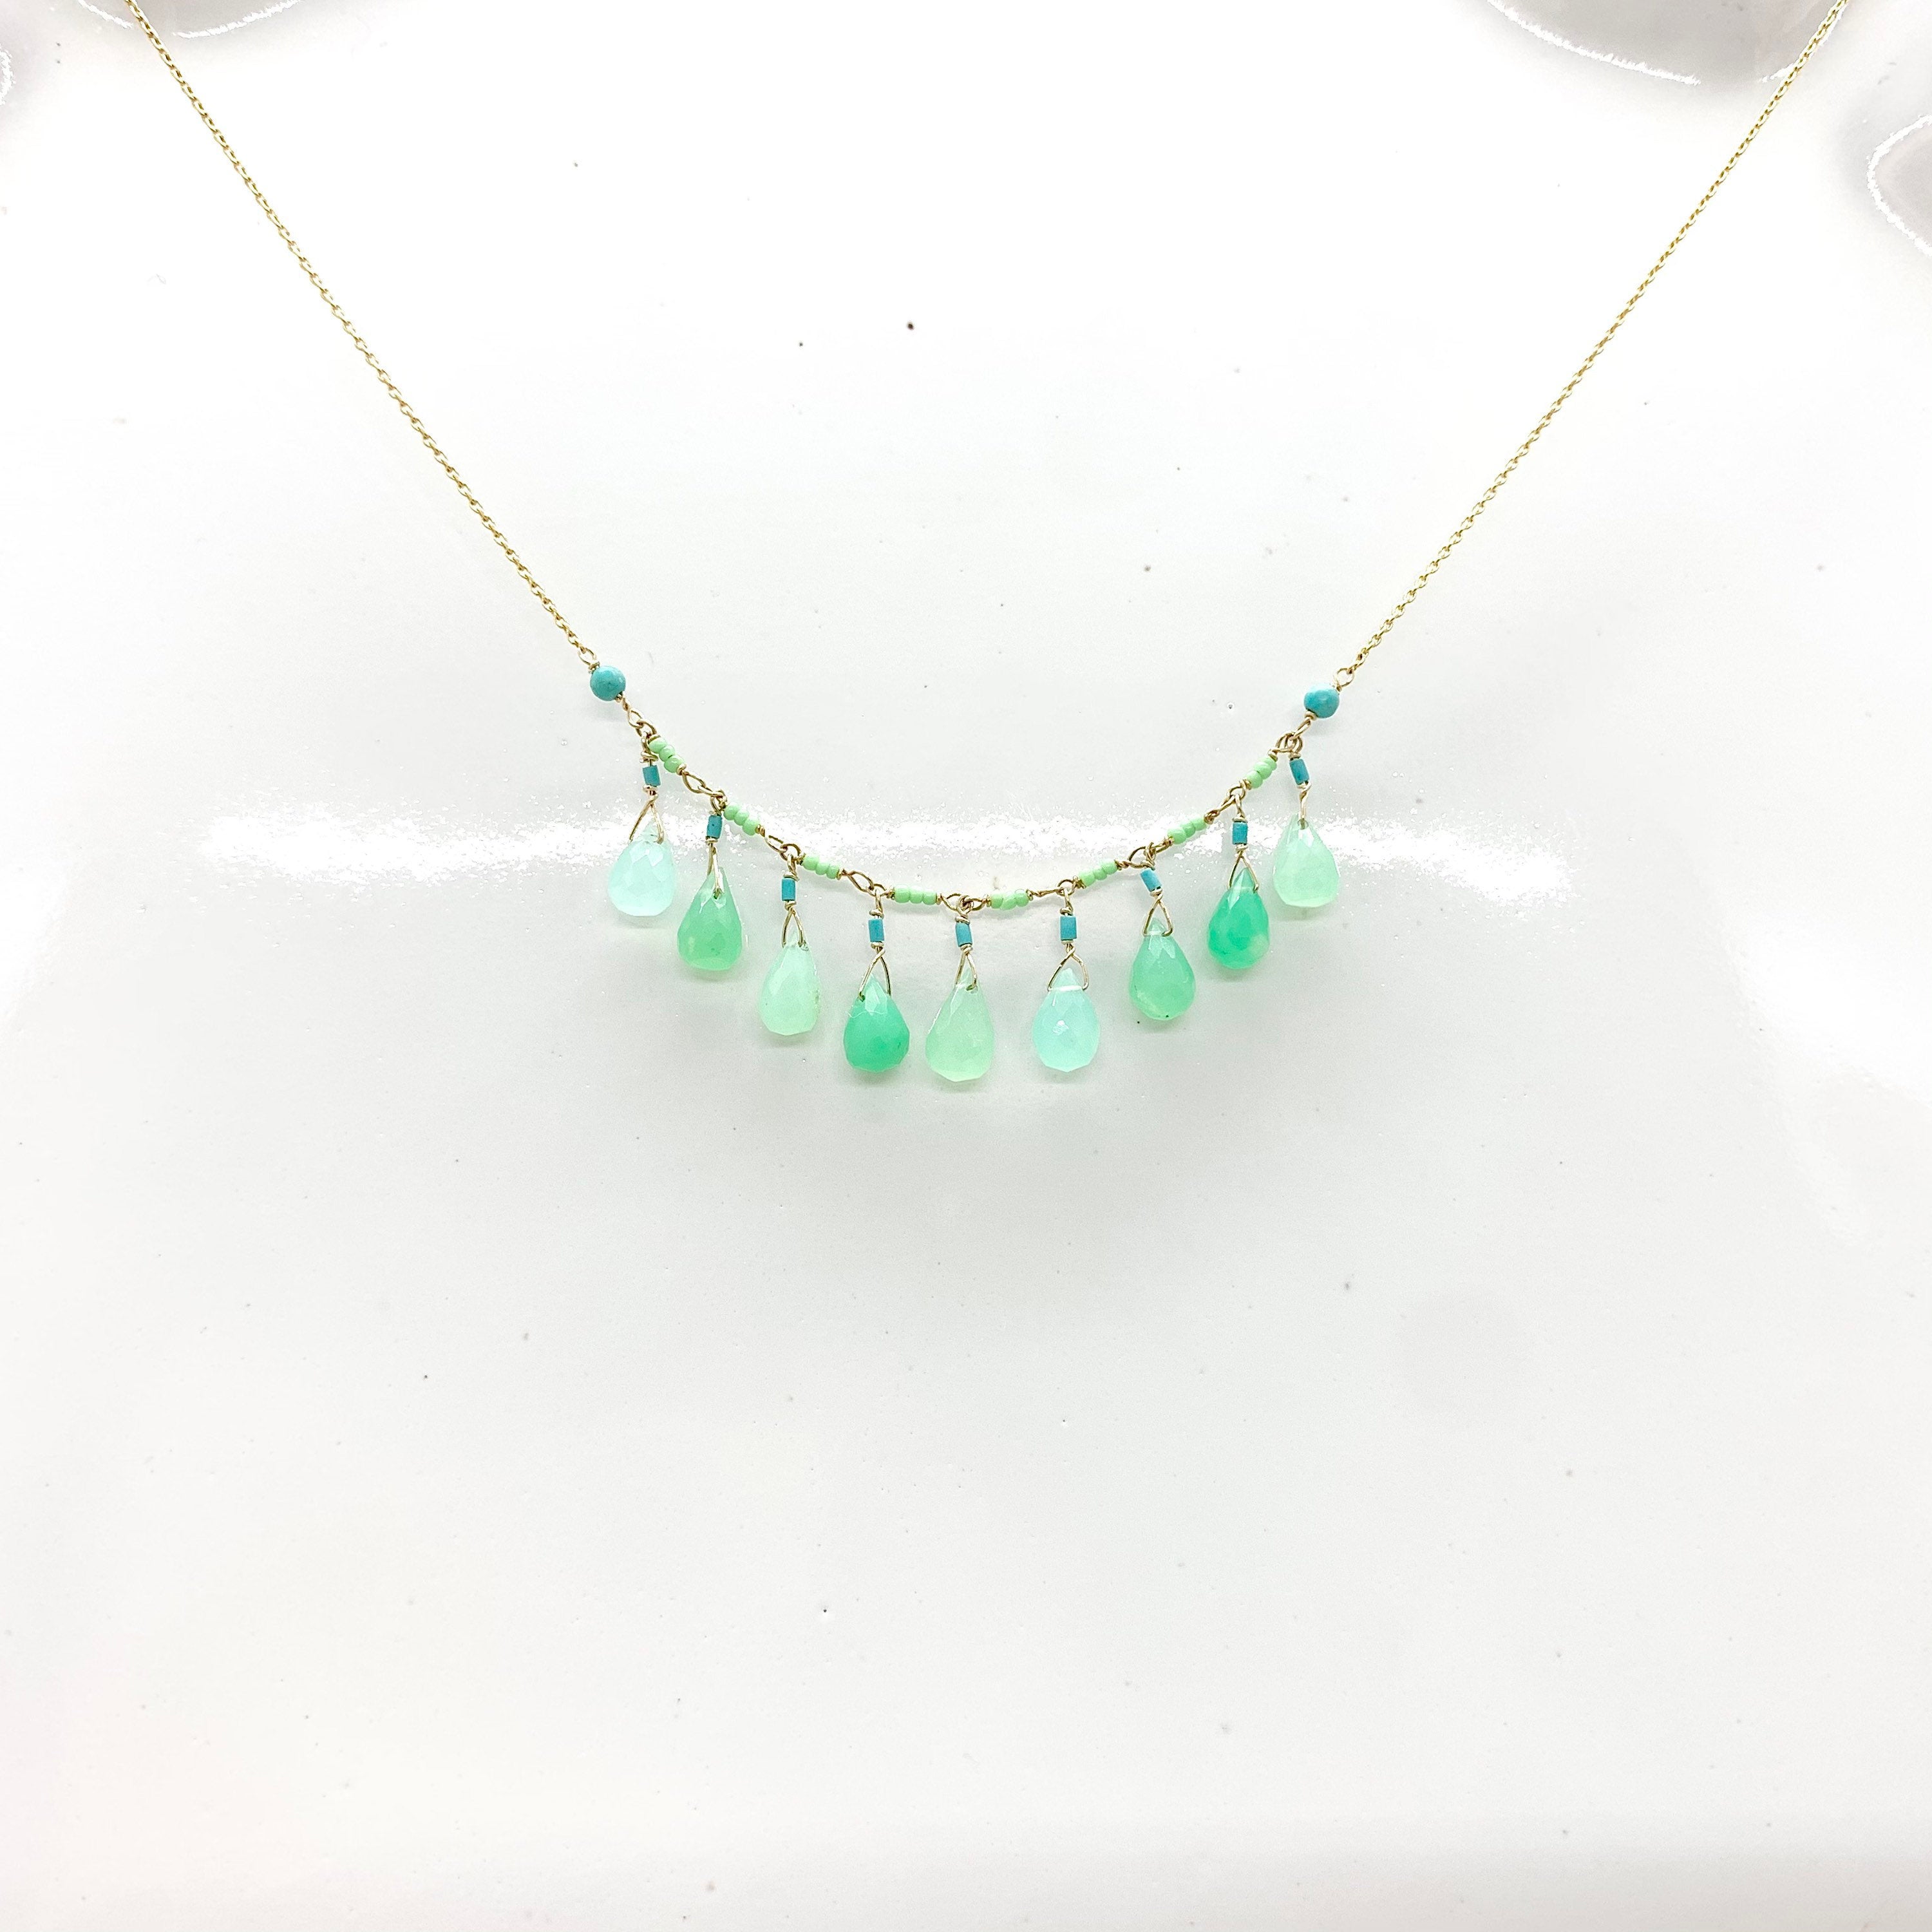 14k Gold Chain Necklace w/ Chrysoprase, Turquoise & Antique Italian Beads